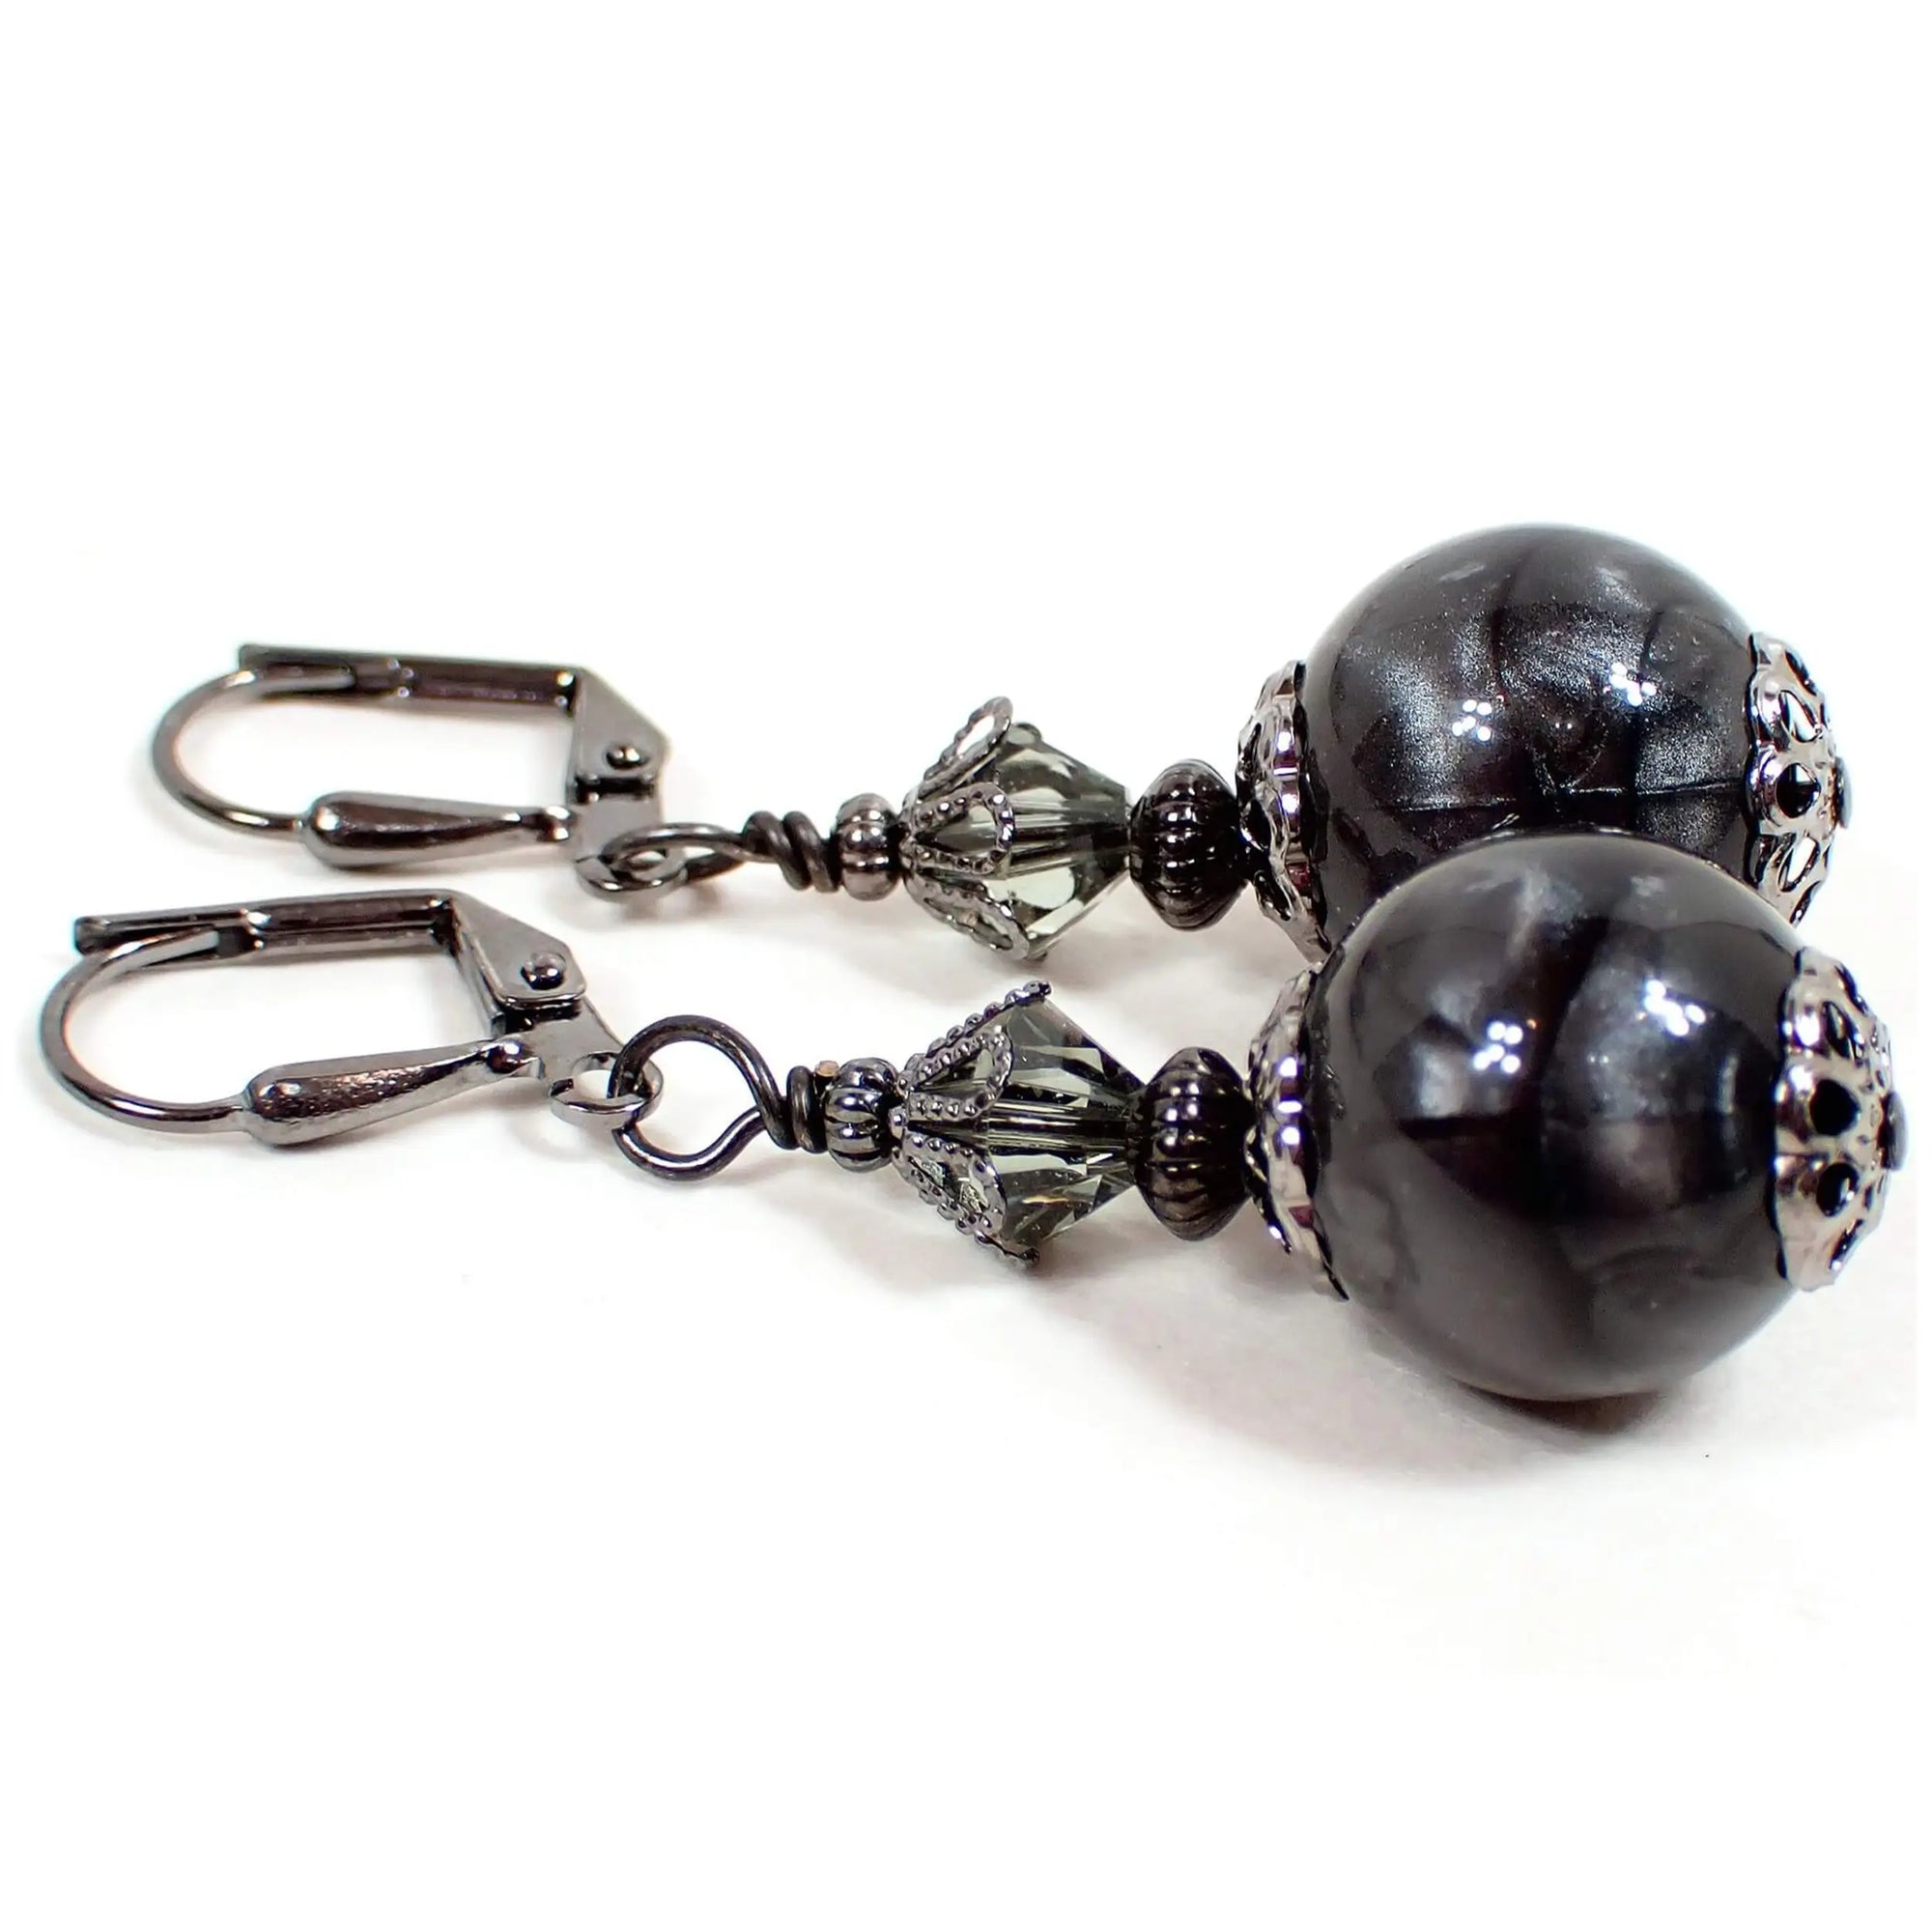 Side view of the handmade drop earrings with vintage lucite beads. The metal is gunmetal gray in color. There are smoky gray faceted glass crystal beads at the top. The lucite beads on the bottom are round sphere shaped and have a dark pearly gray color.